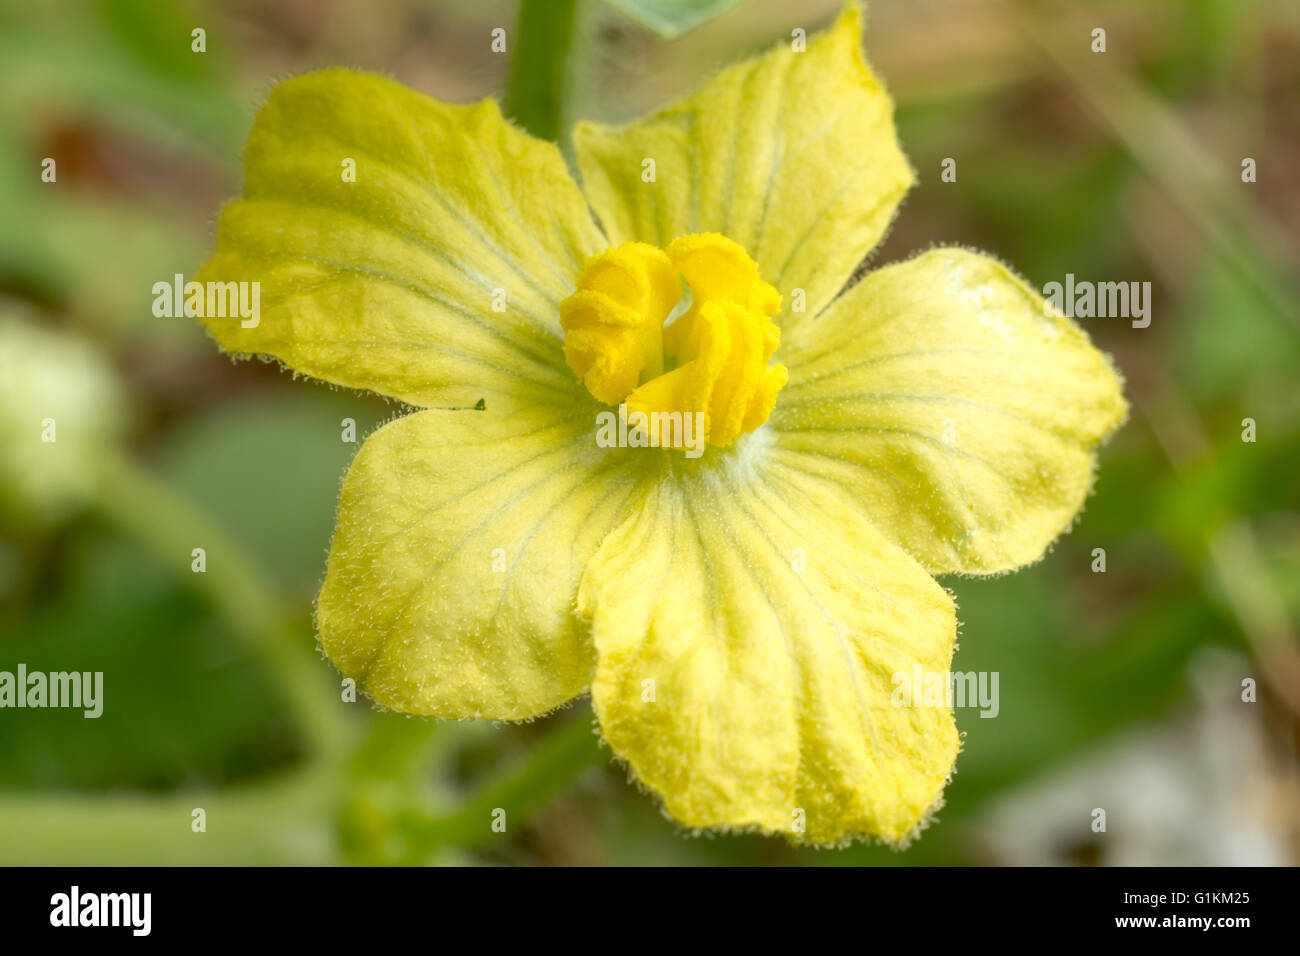 Flower of Organic agriculture, close up watermelon flower Stock Photo